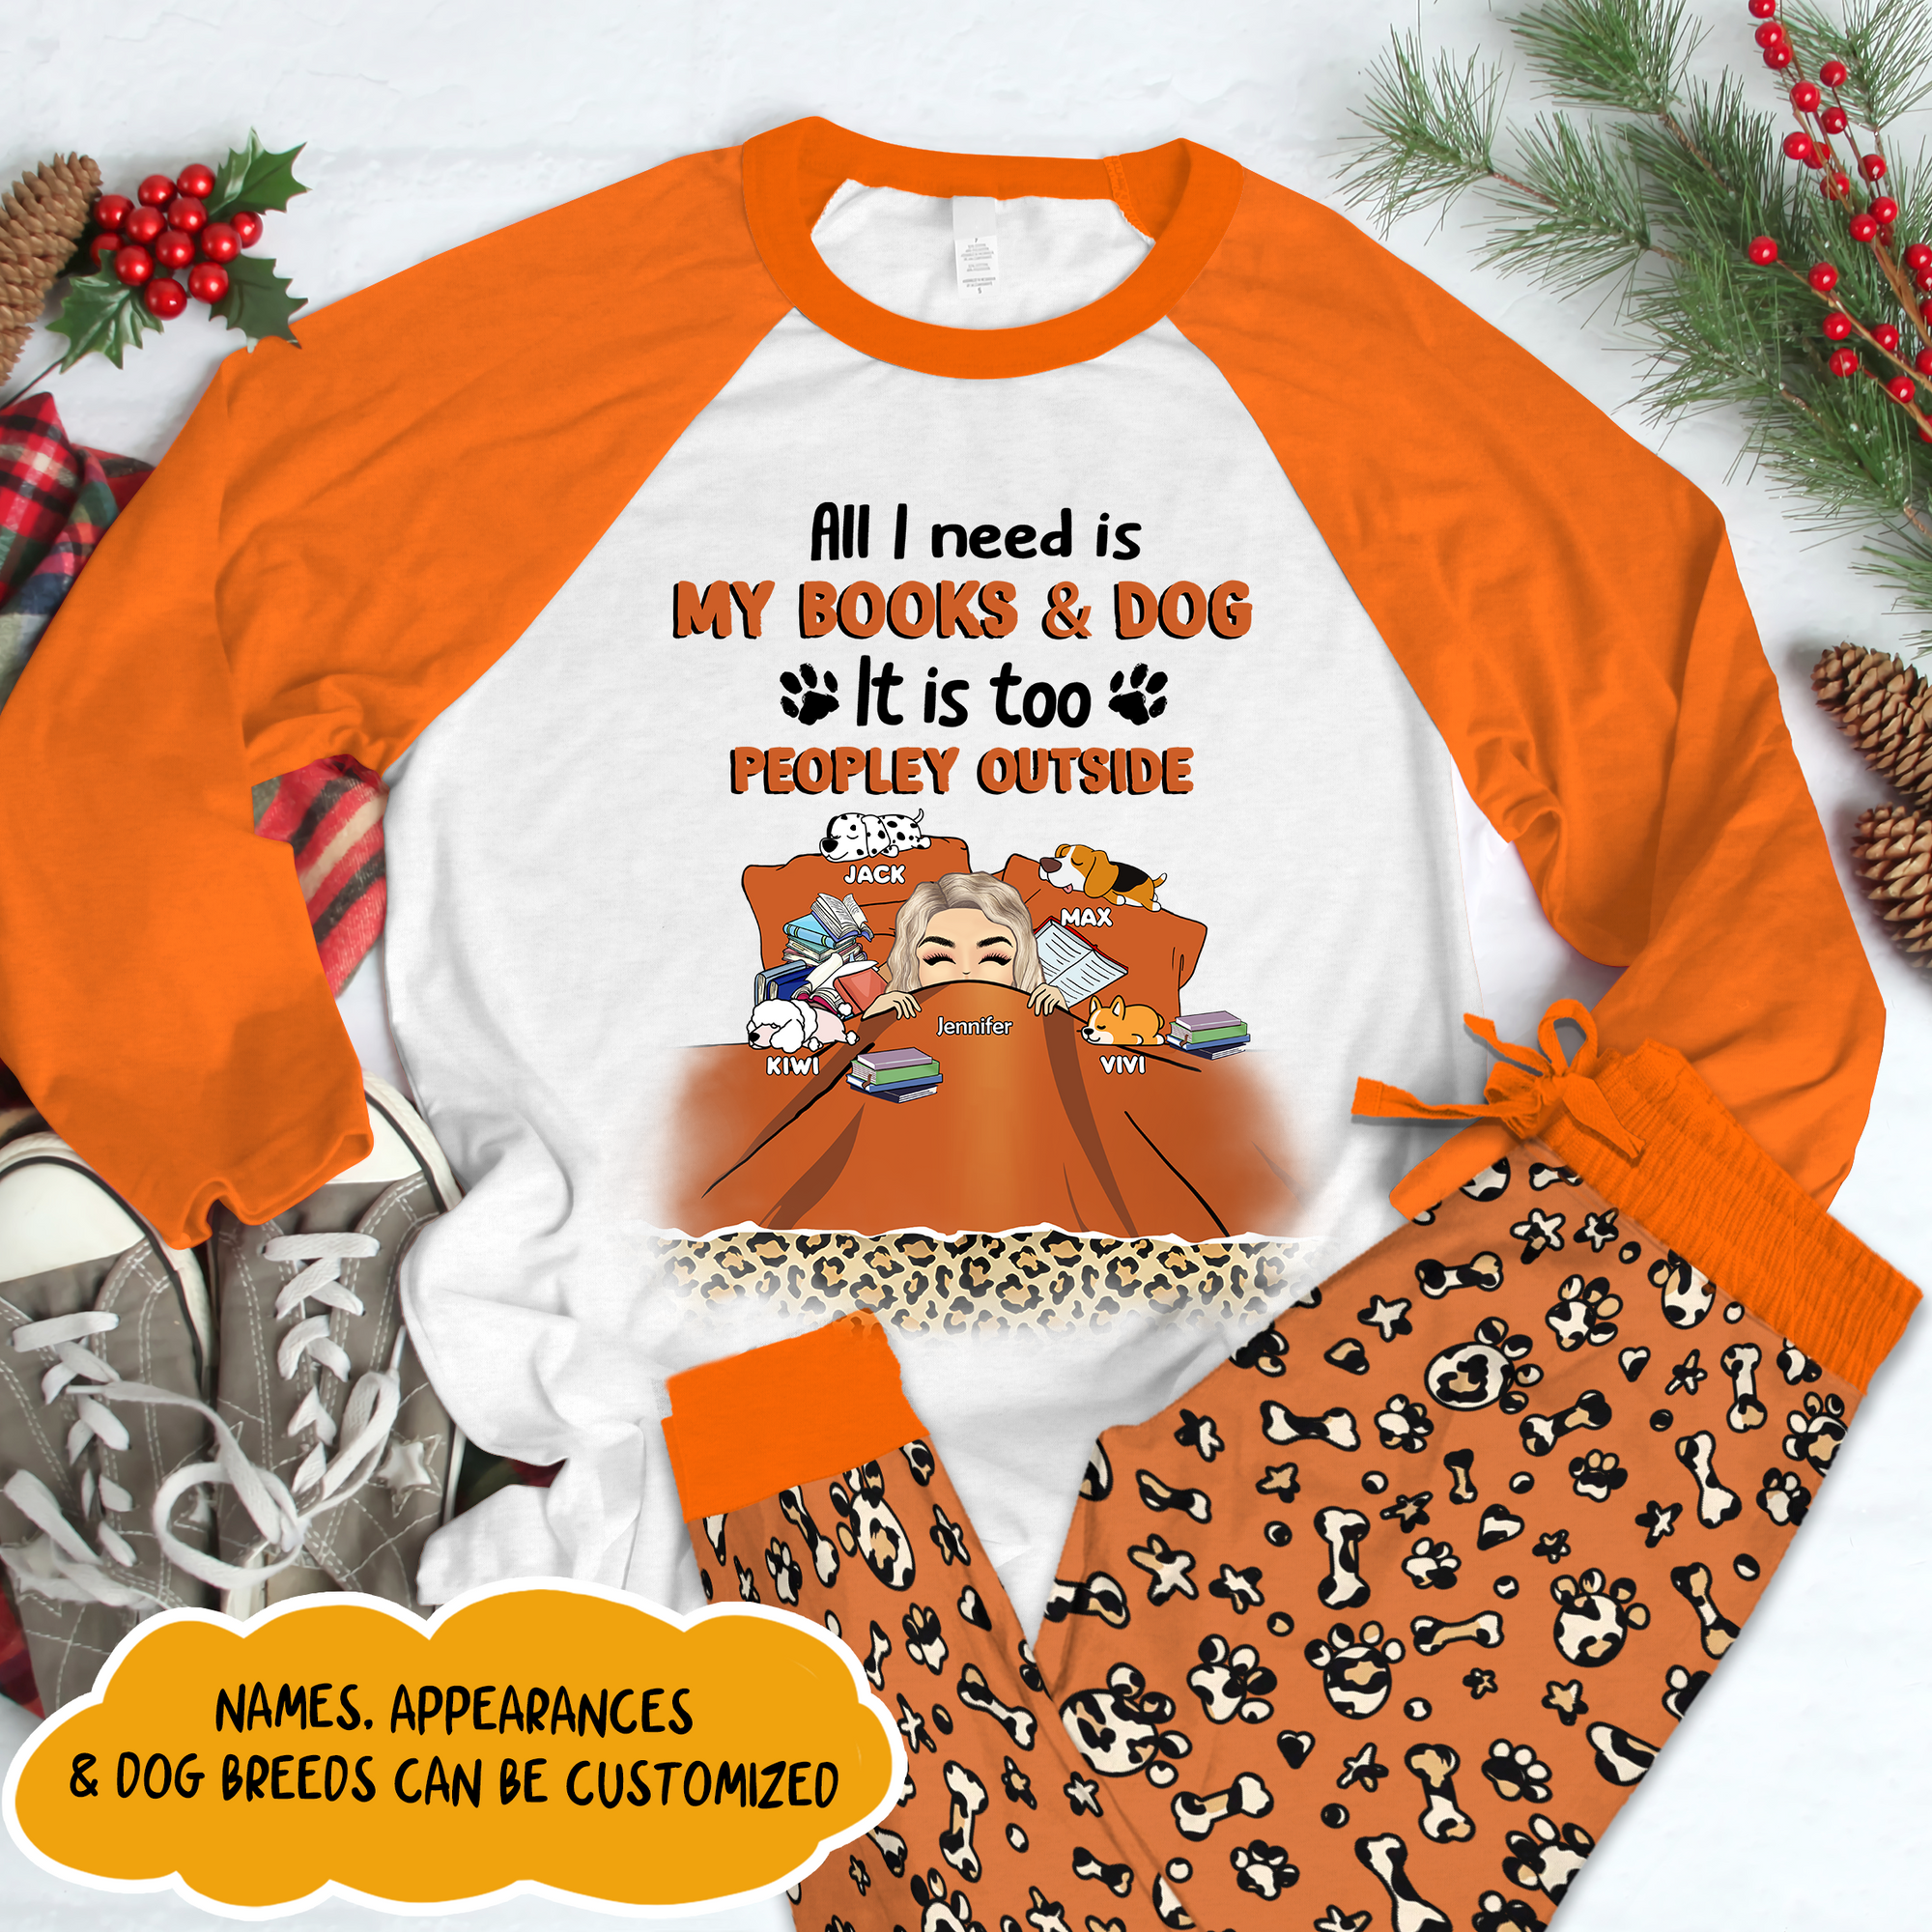 Personalized Pajama Set - Gift For Dog Lovers - All I Need Is My Books & Dogs